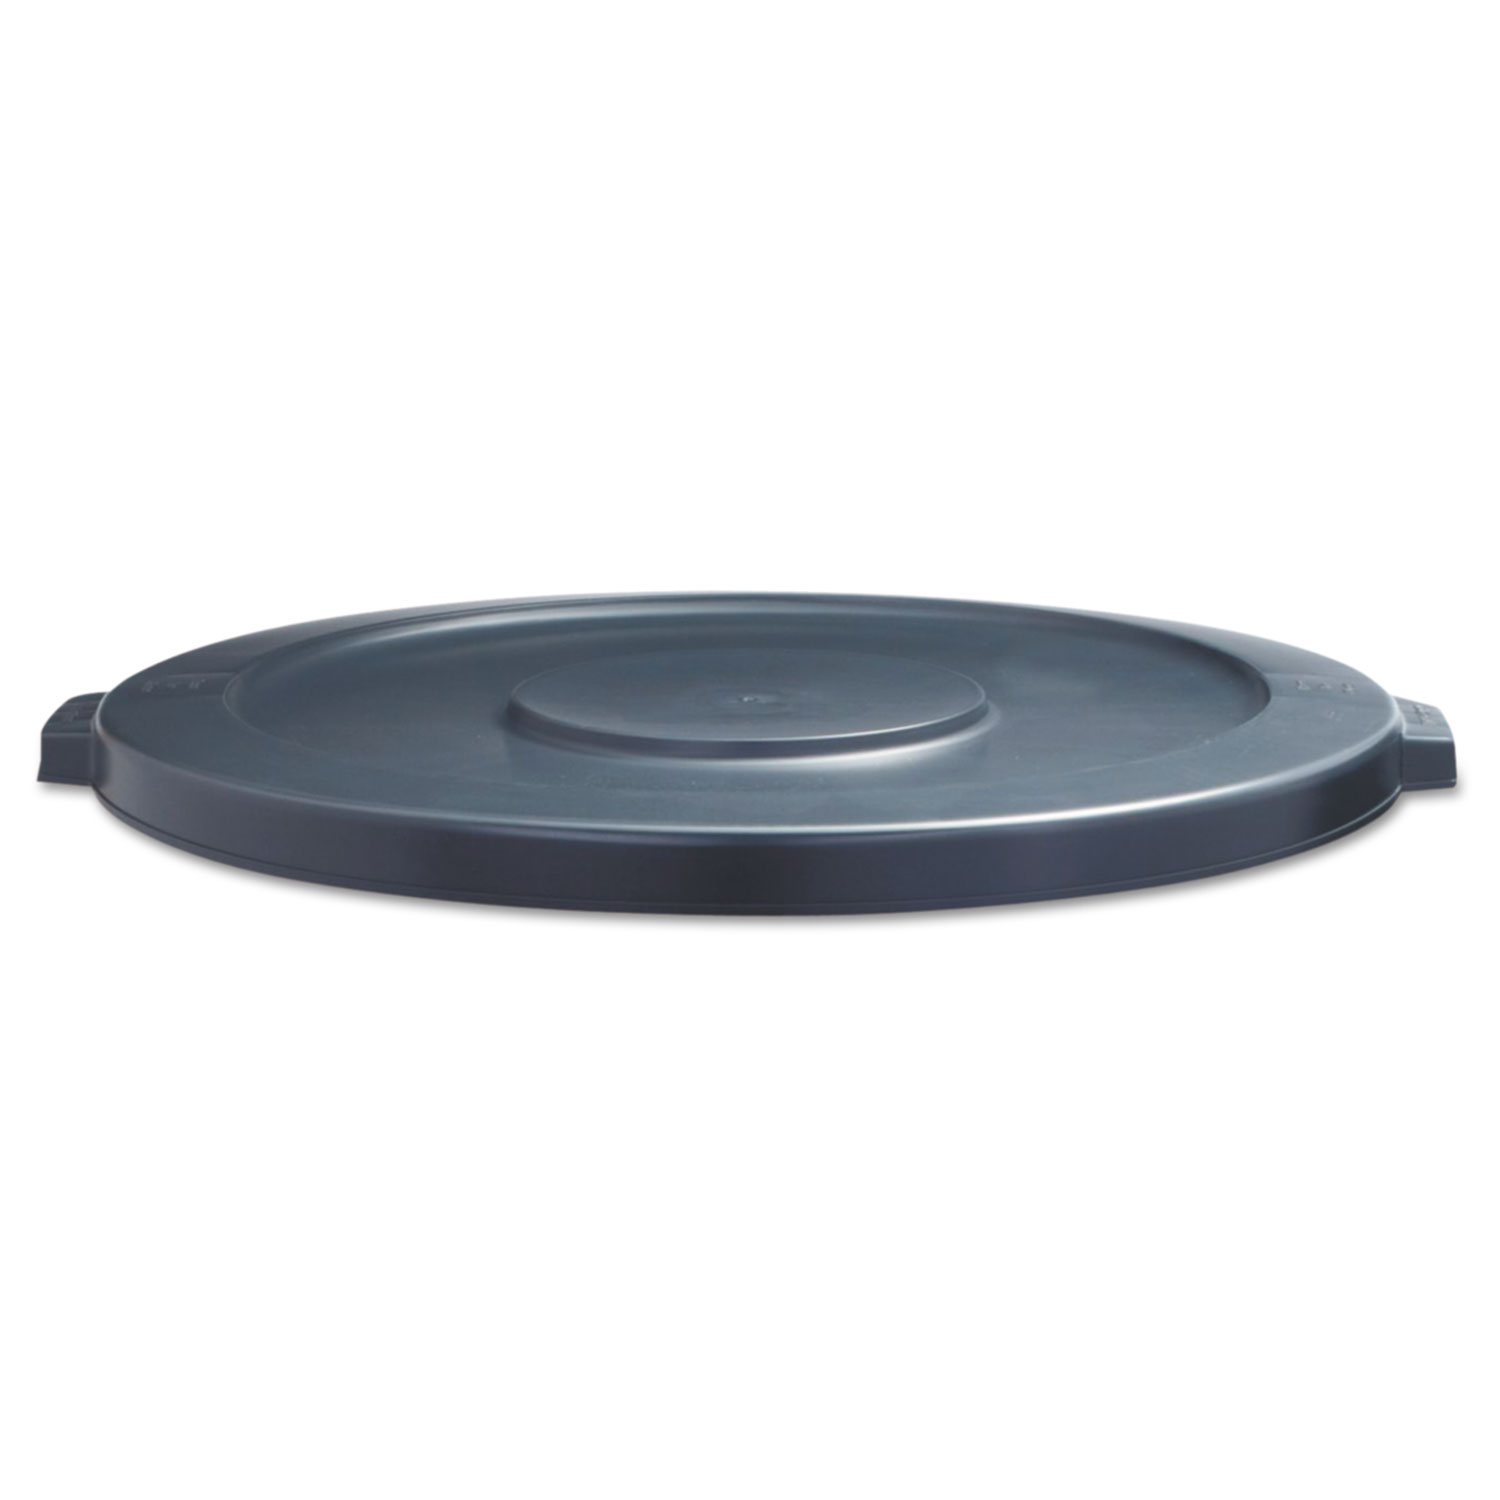 Lids for 44 gal Waste Receptacles, Flat-Top, Round, Plastic Gray